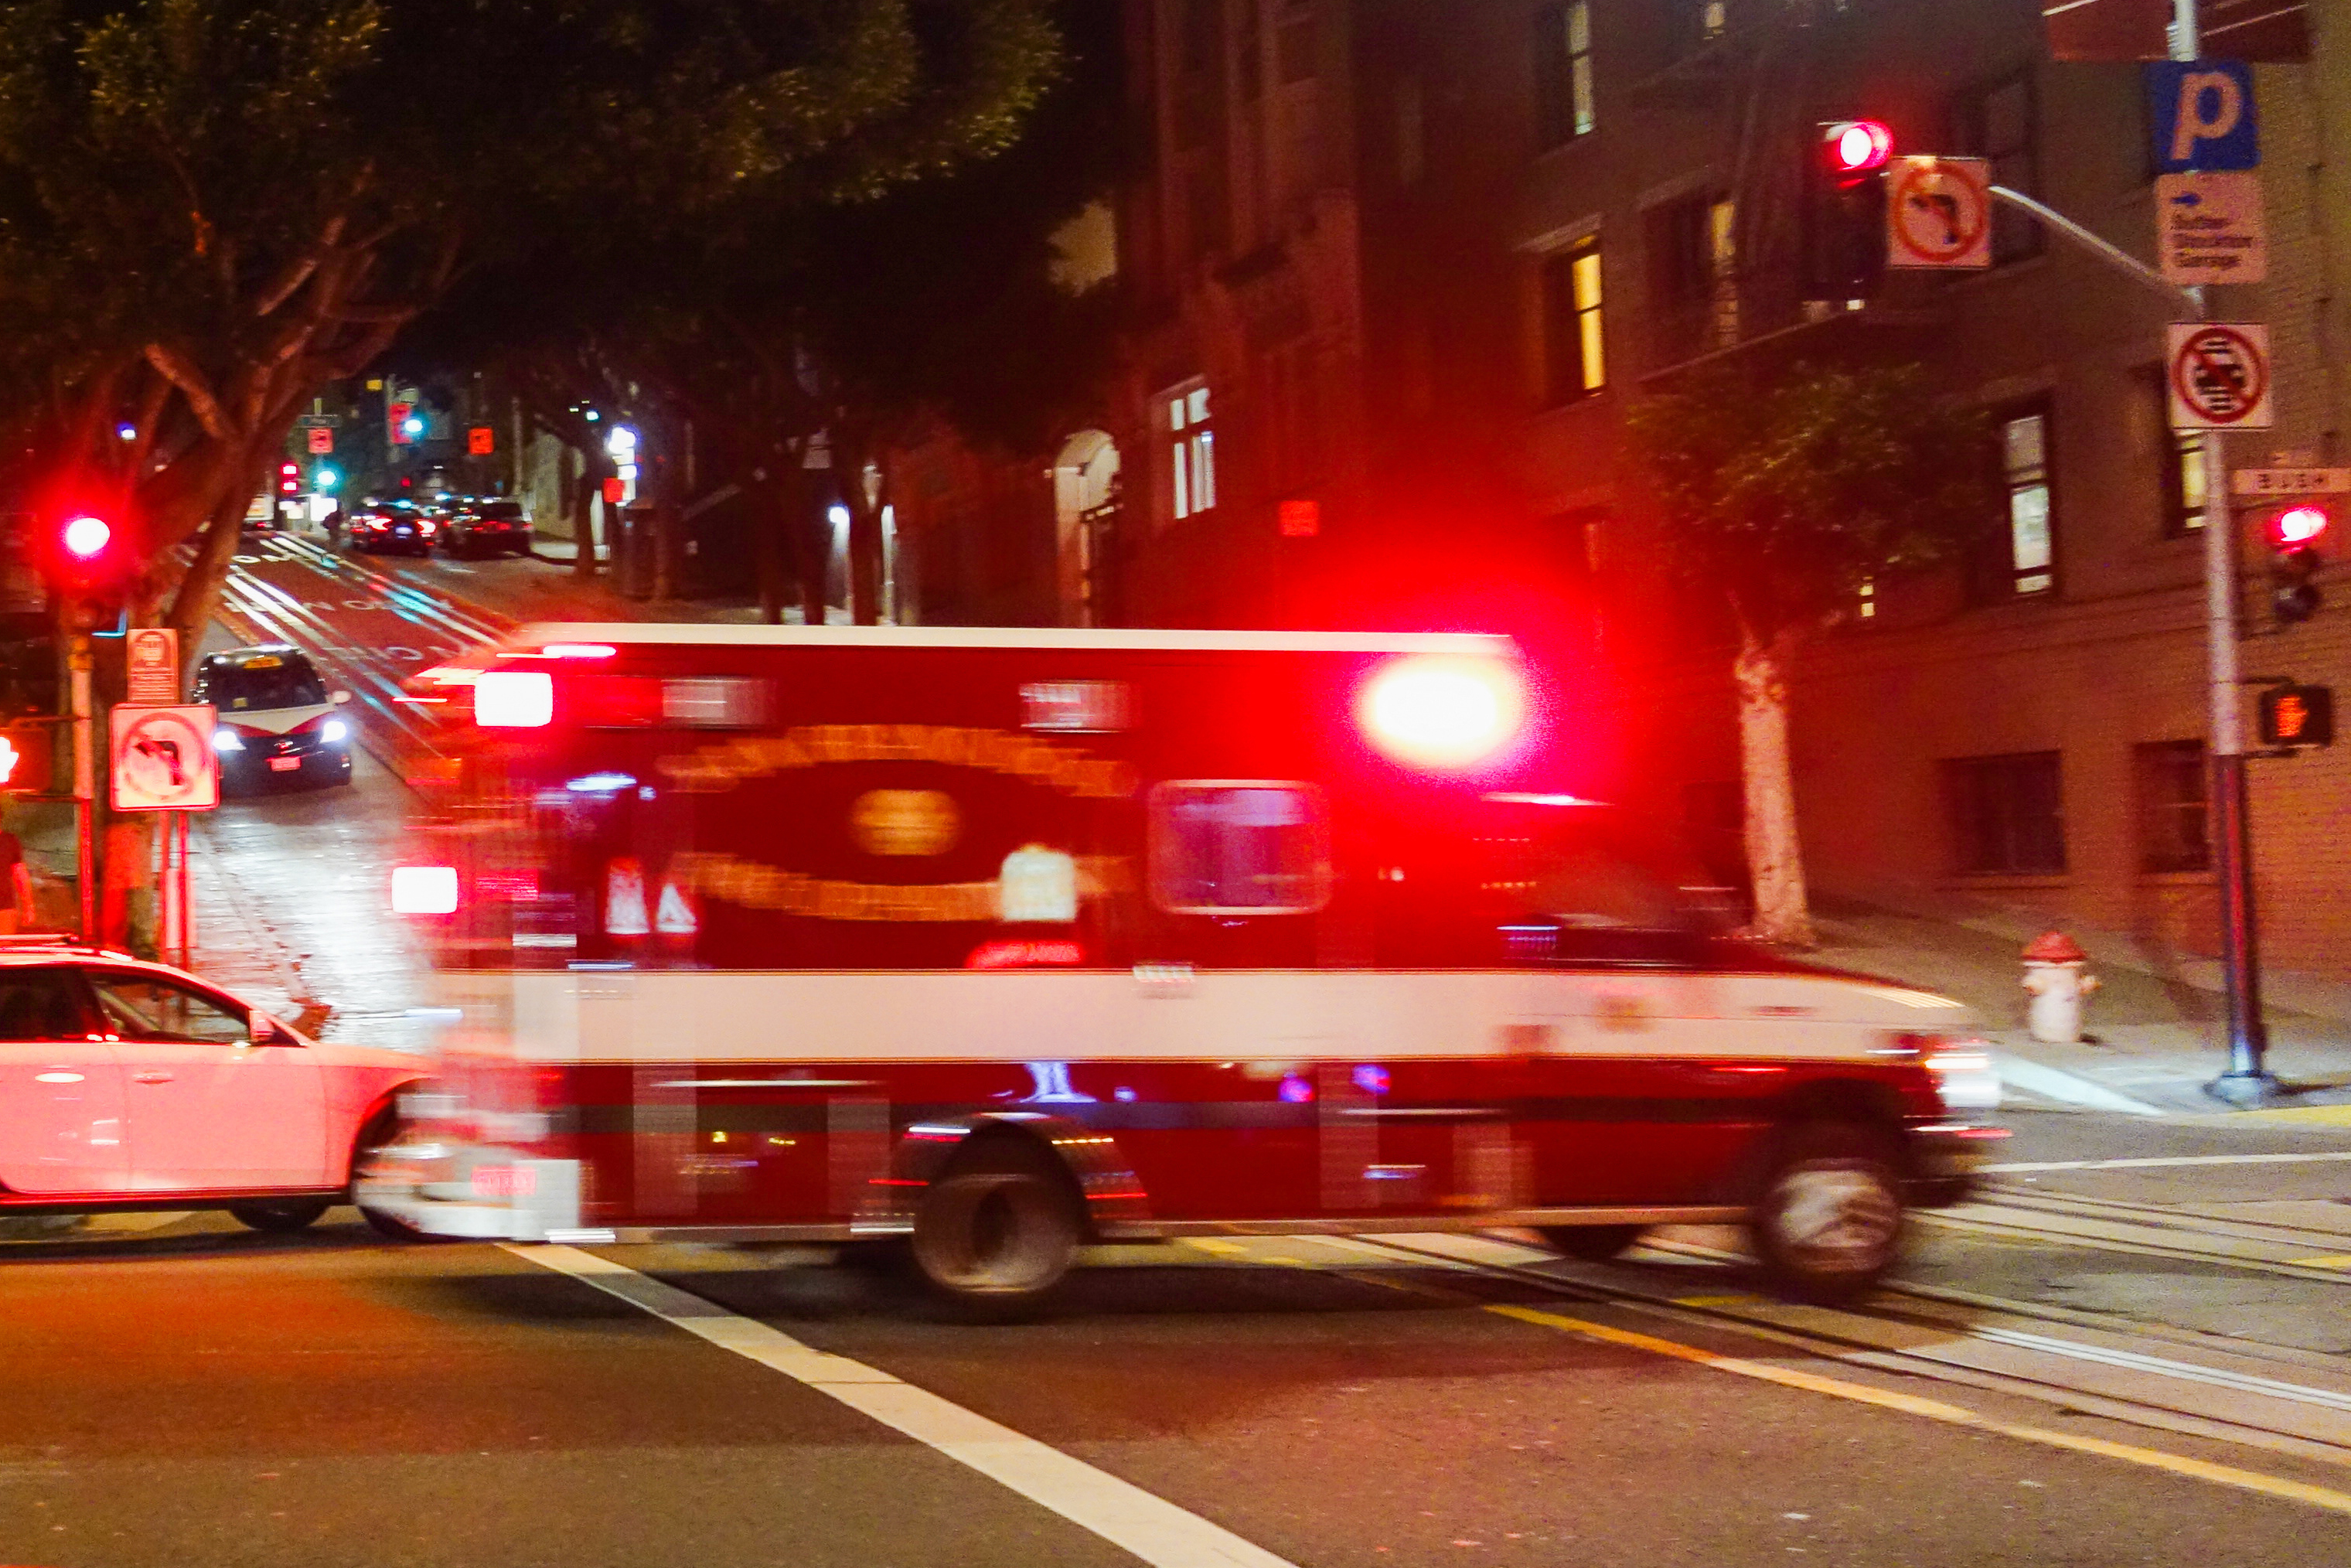 A red ambulance is seen from the side driving through an intersection with its emergency lights on.